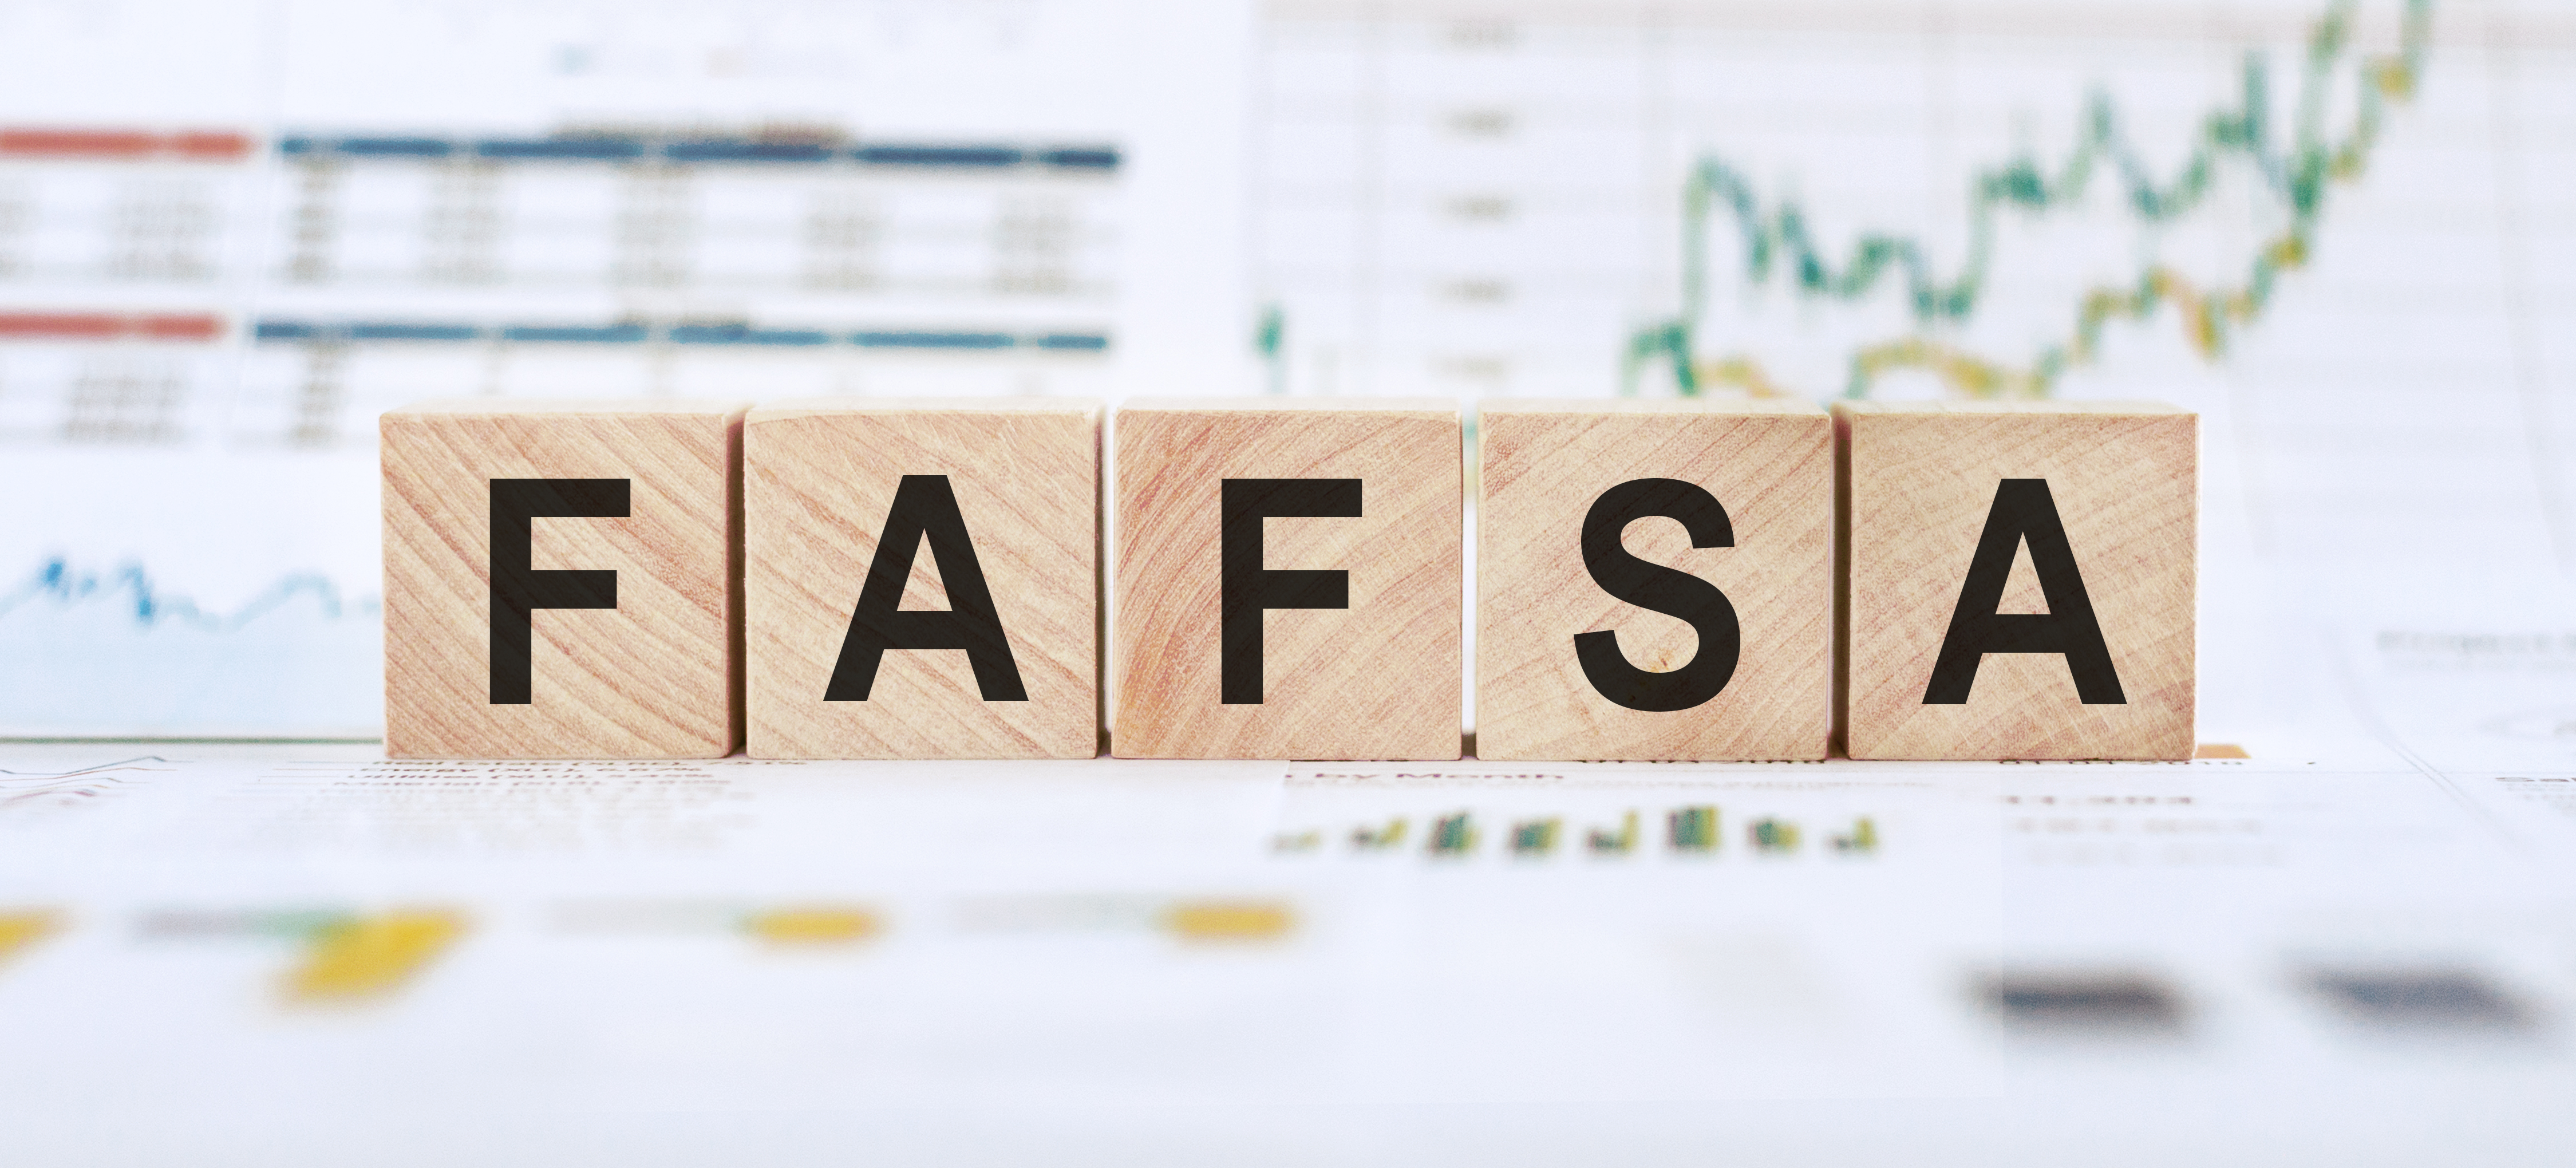 Word,Fafsa,Made,With,Wood,Building,Blocks,On,Background,From